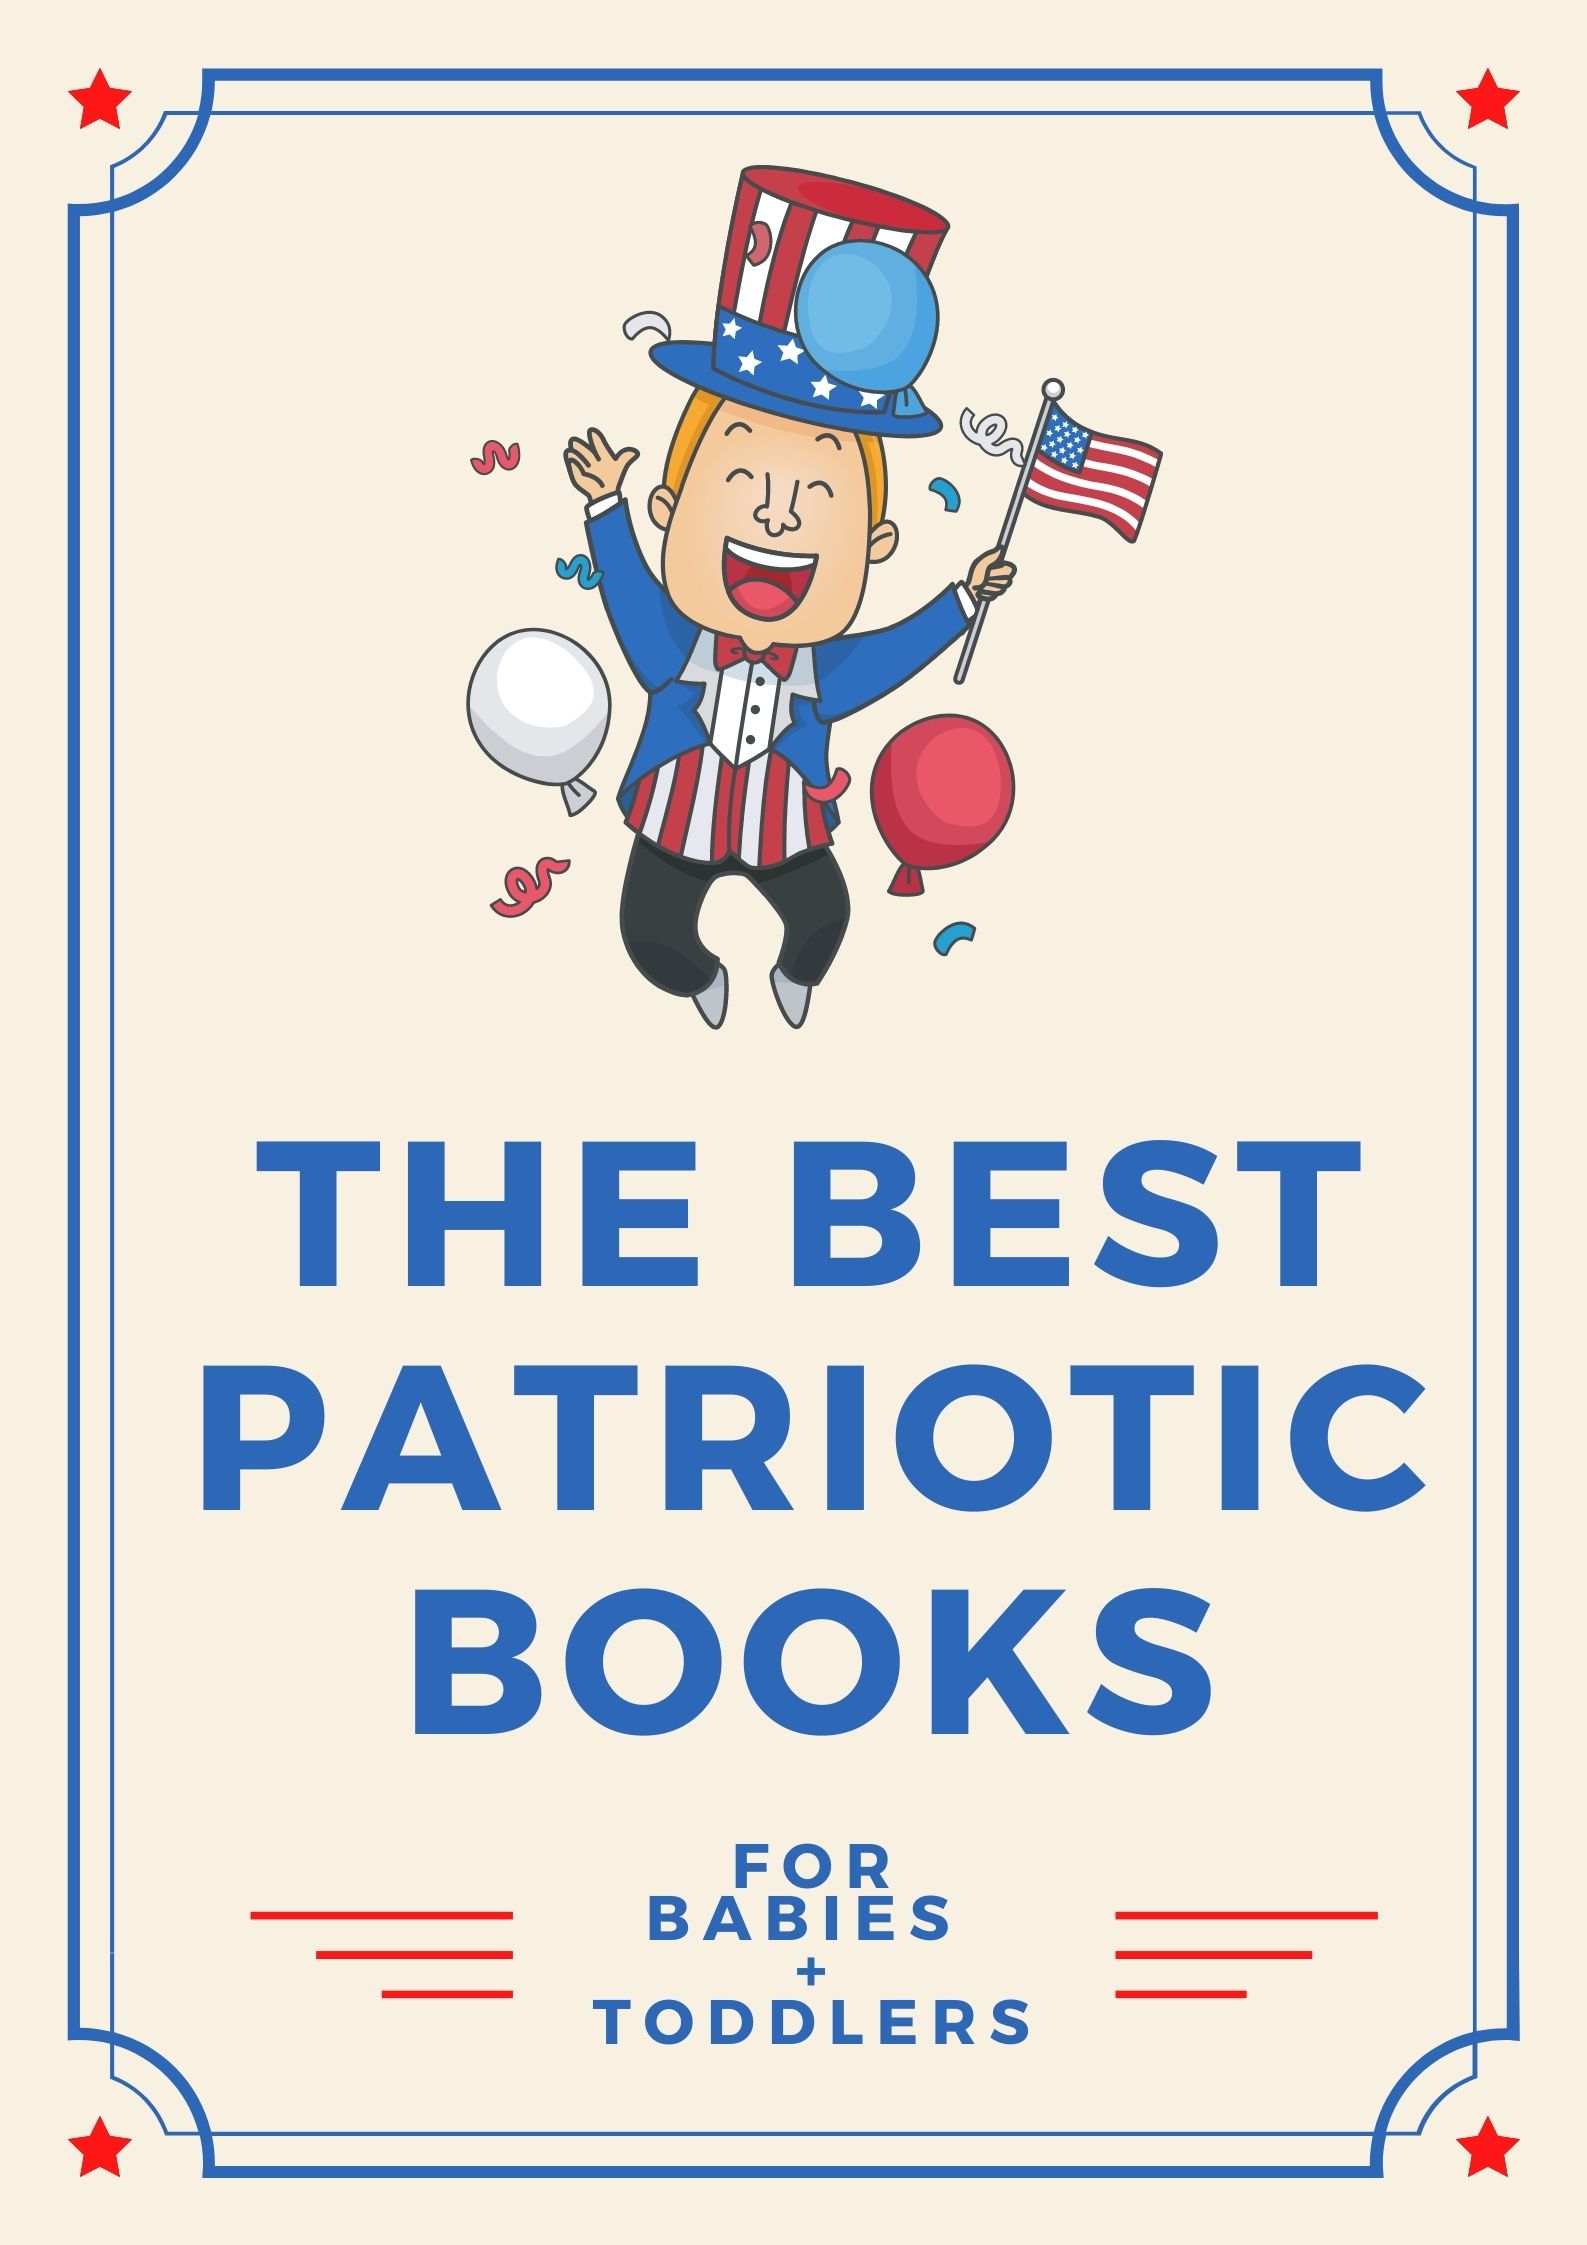 the best patriotic books for babies & toddlers